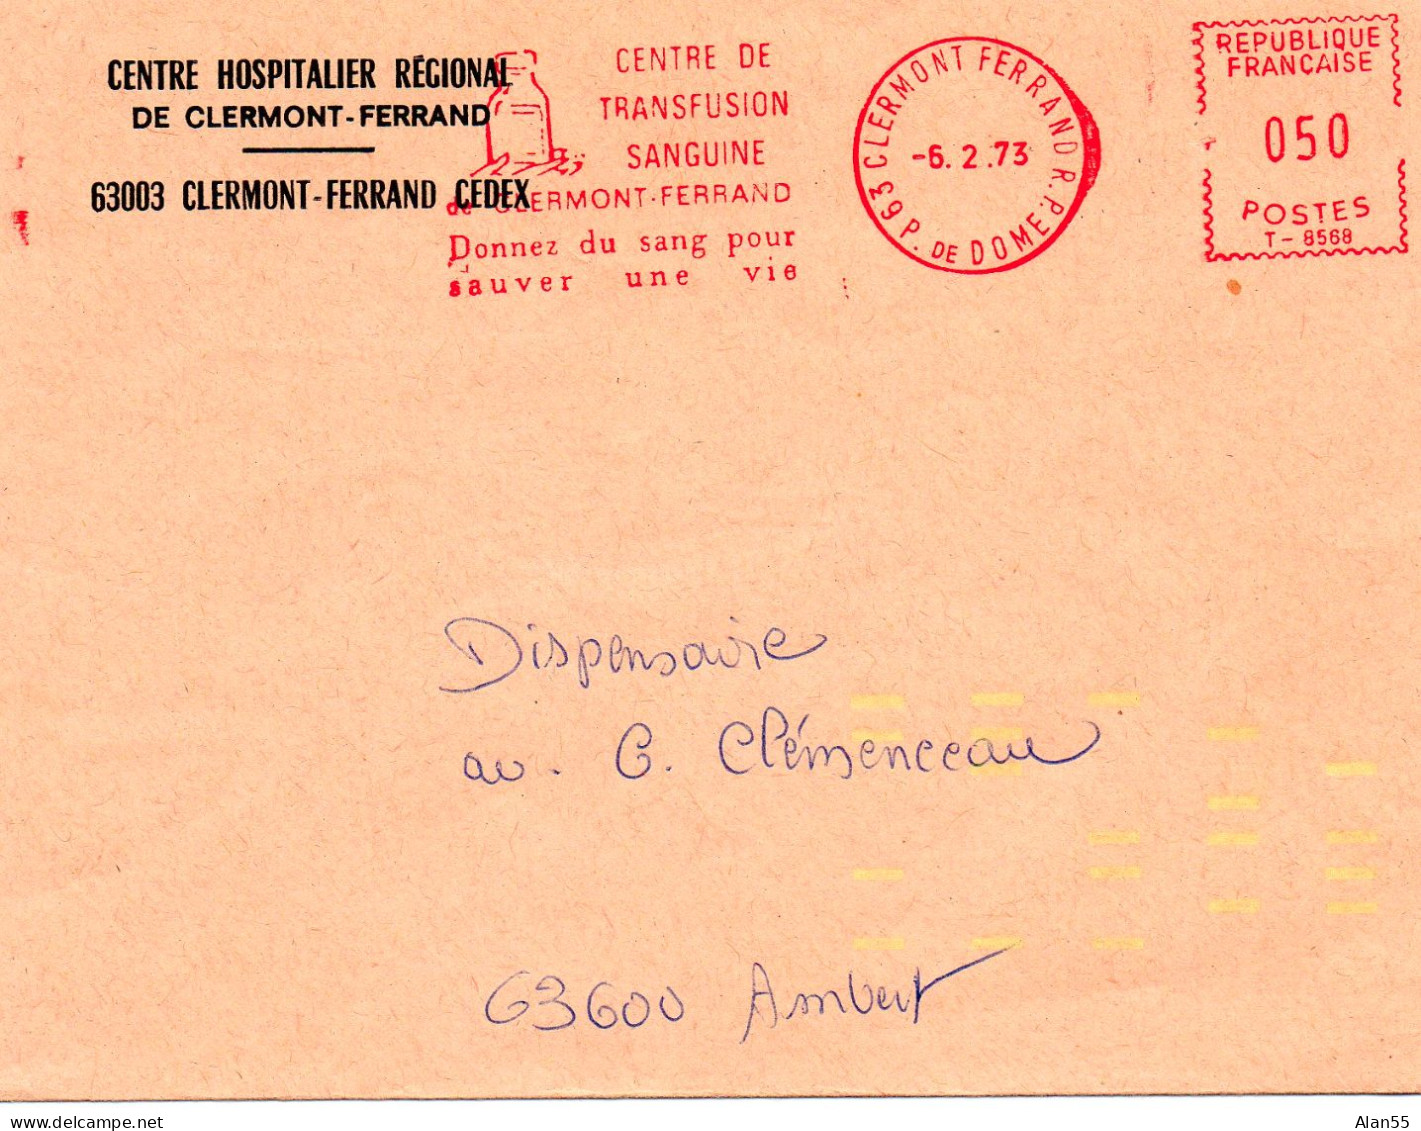 FRANCE.1956. " TRANSFUSION SANGUINE". MARQUE JAUNE INDEXATION COURRIER. - First Aid